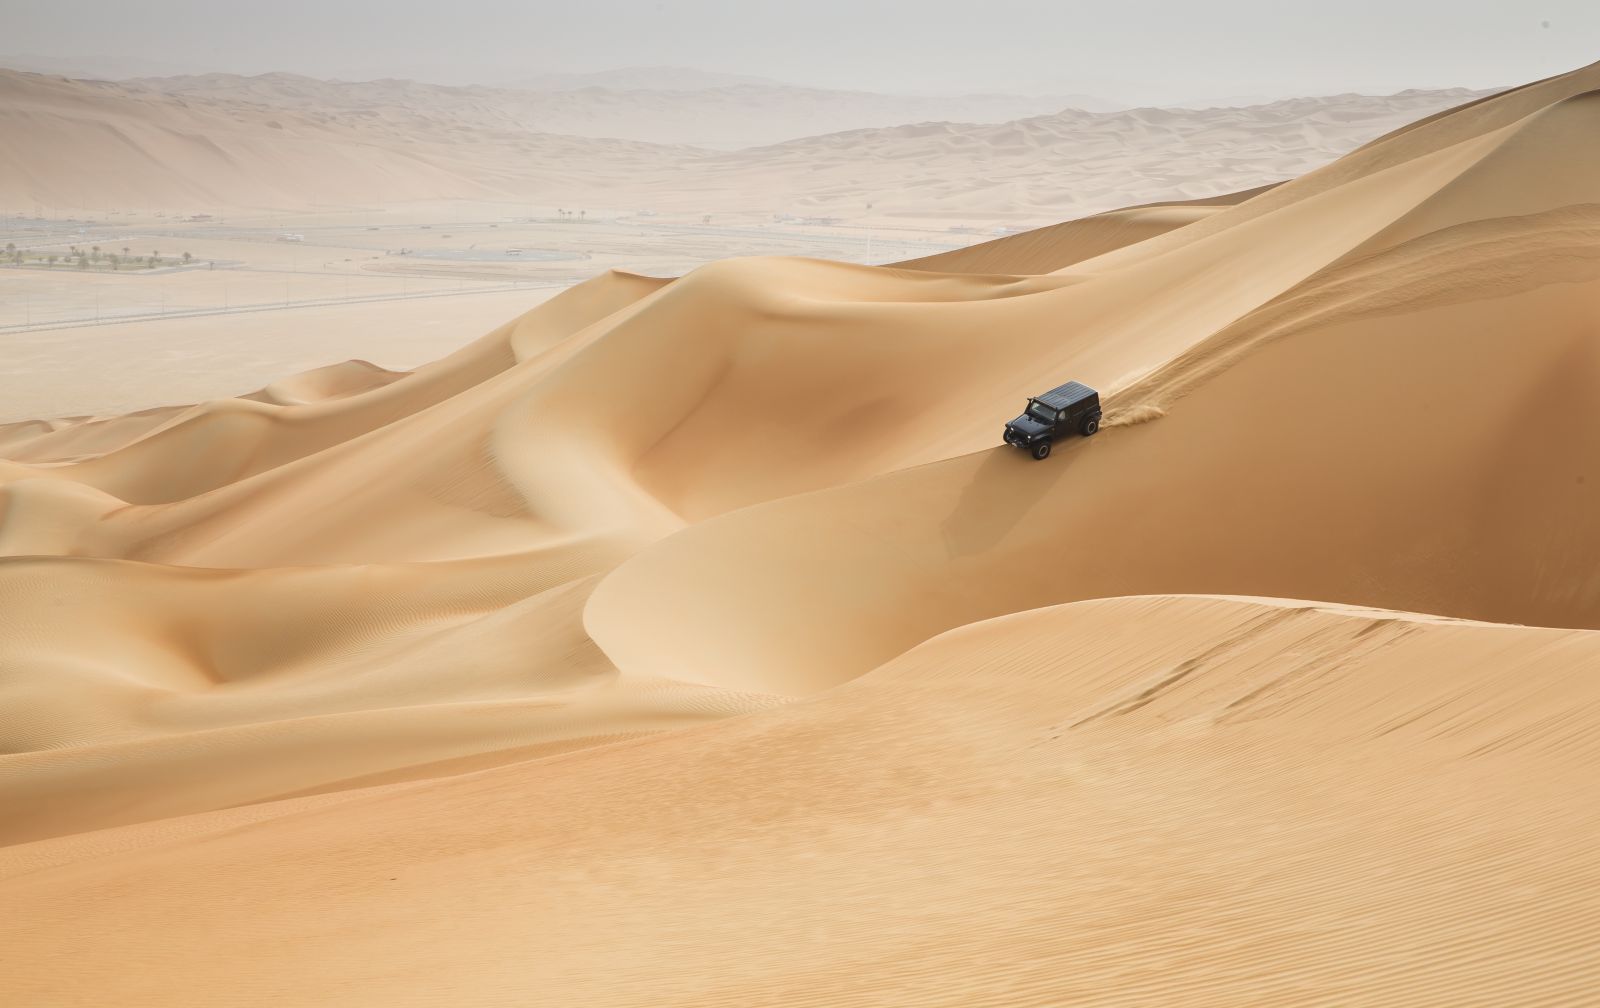 A jeep driving through the desert dunes in Oman